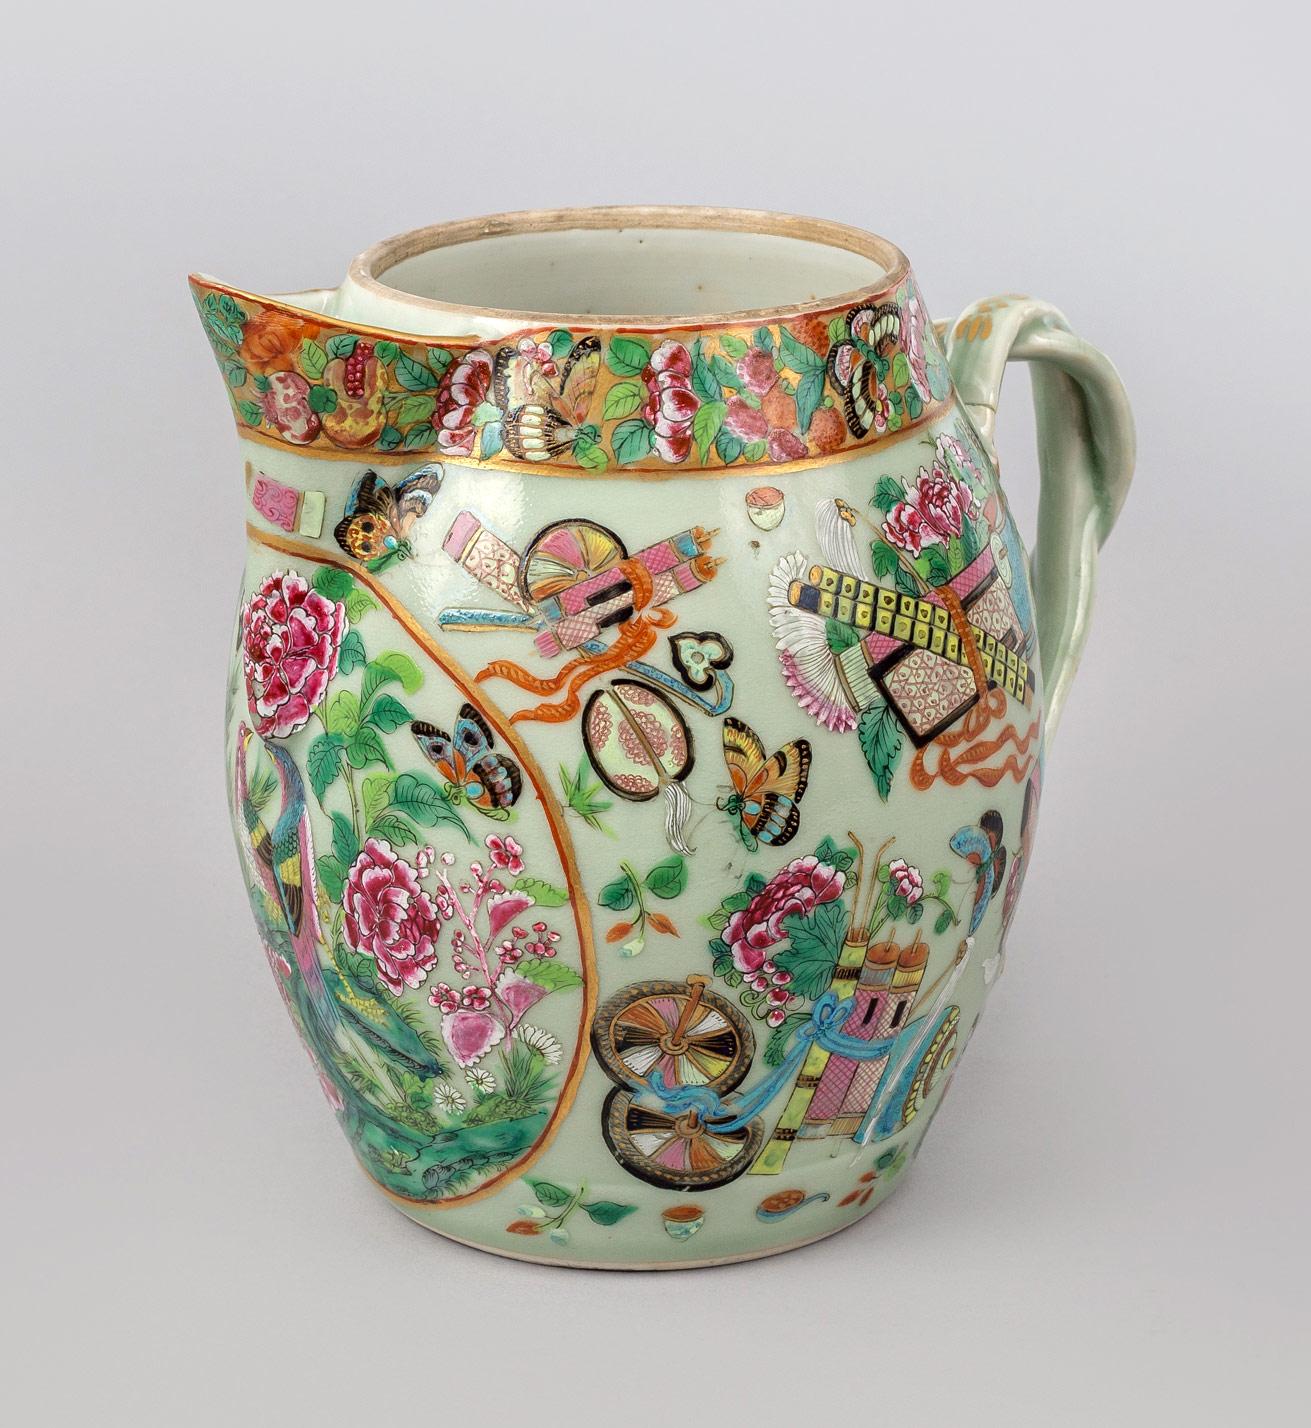 Very unusual large Chinese Export Canton porcelain cider jug in the famille rose palette decorated with exotic birds, butterflies, chrysanthemums, items for celebration, elegant intertwined strapped handles ending in gilded foliate terminals. The